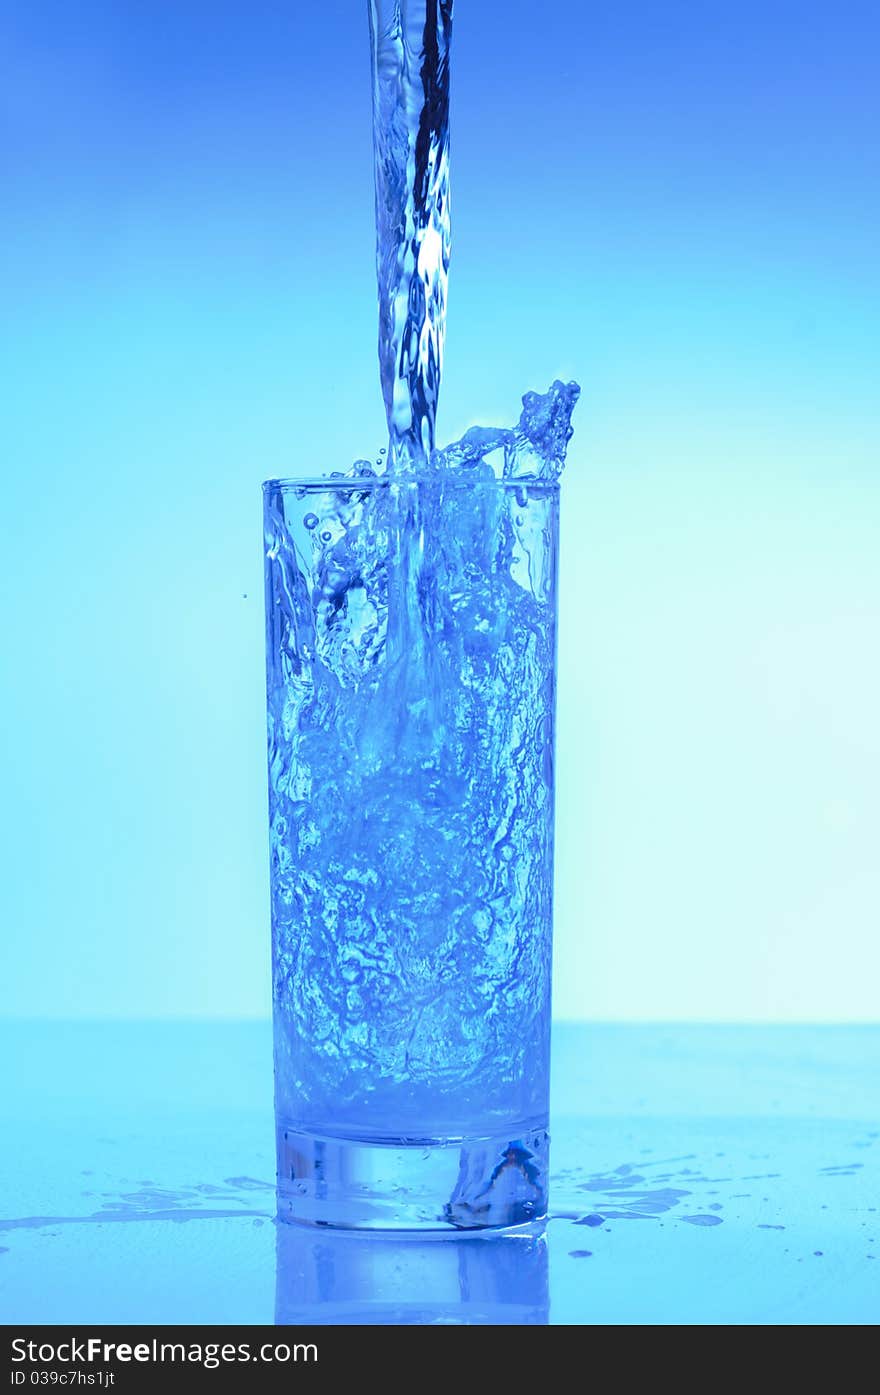 A jet of pure water is poured into a glass and forms a spray. A jet of pure water is poured into a glass and forms a spray